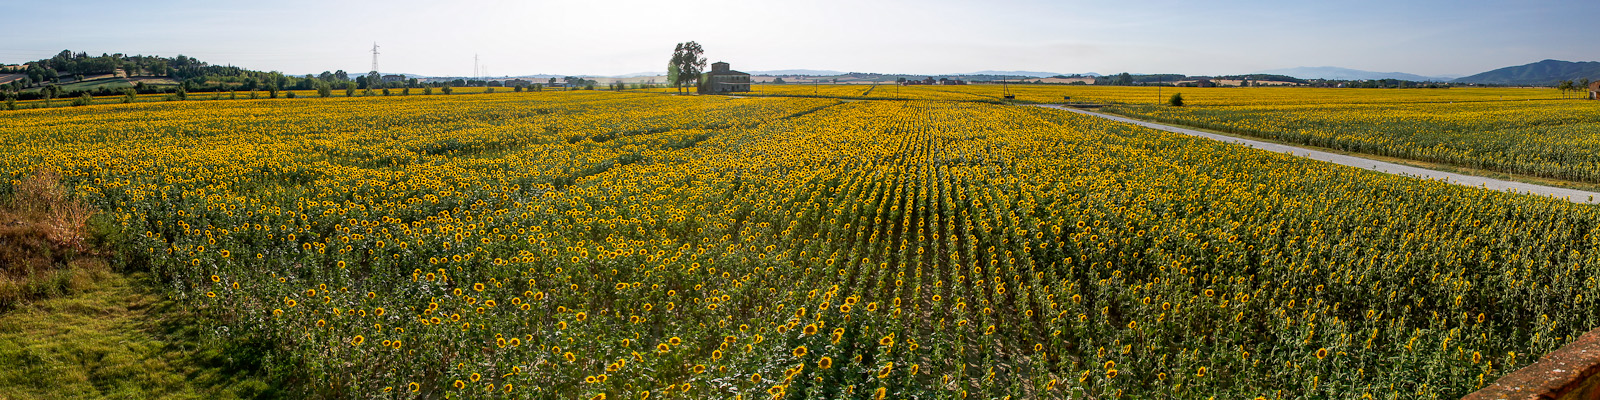 The valley is blanketed with sunflowers during the early summer